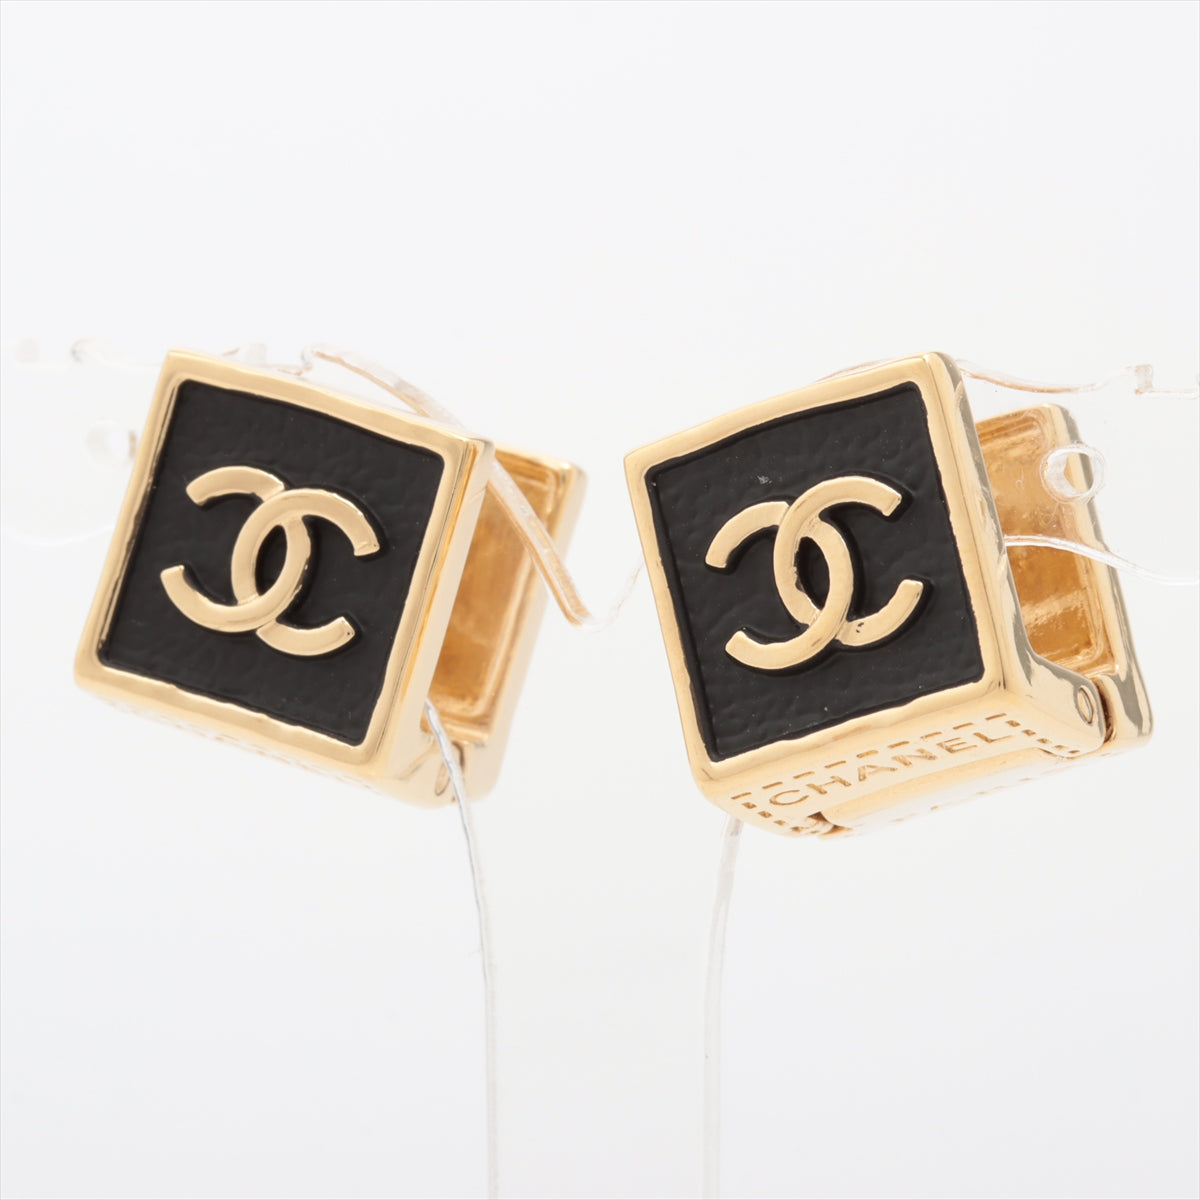 Chanel Coco Mark B23S Piercing jewelry (for both ears) GP Black